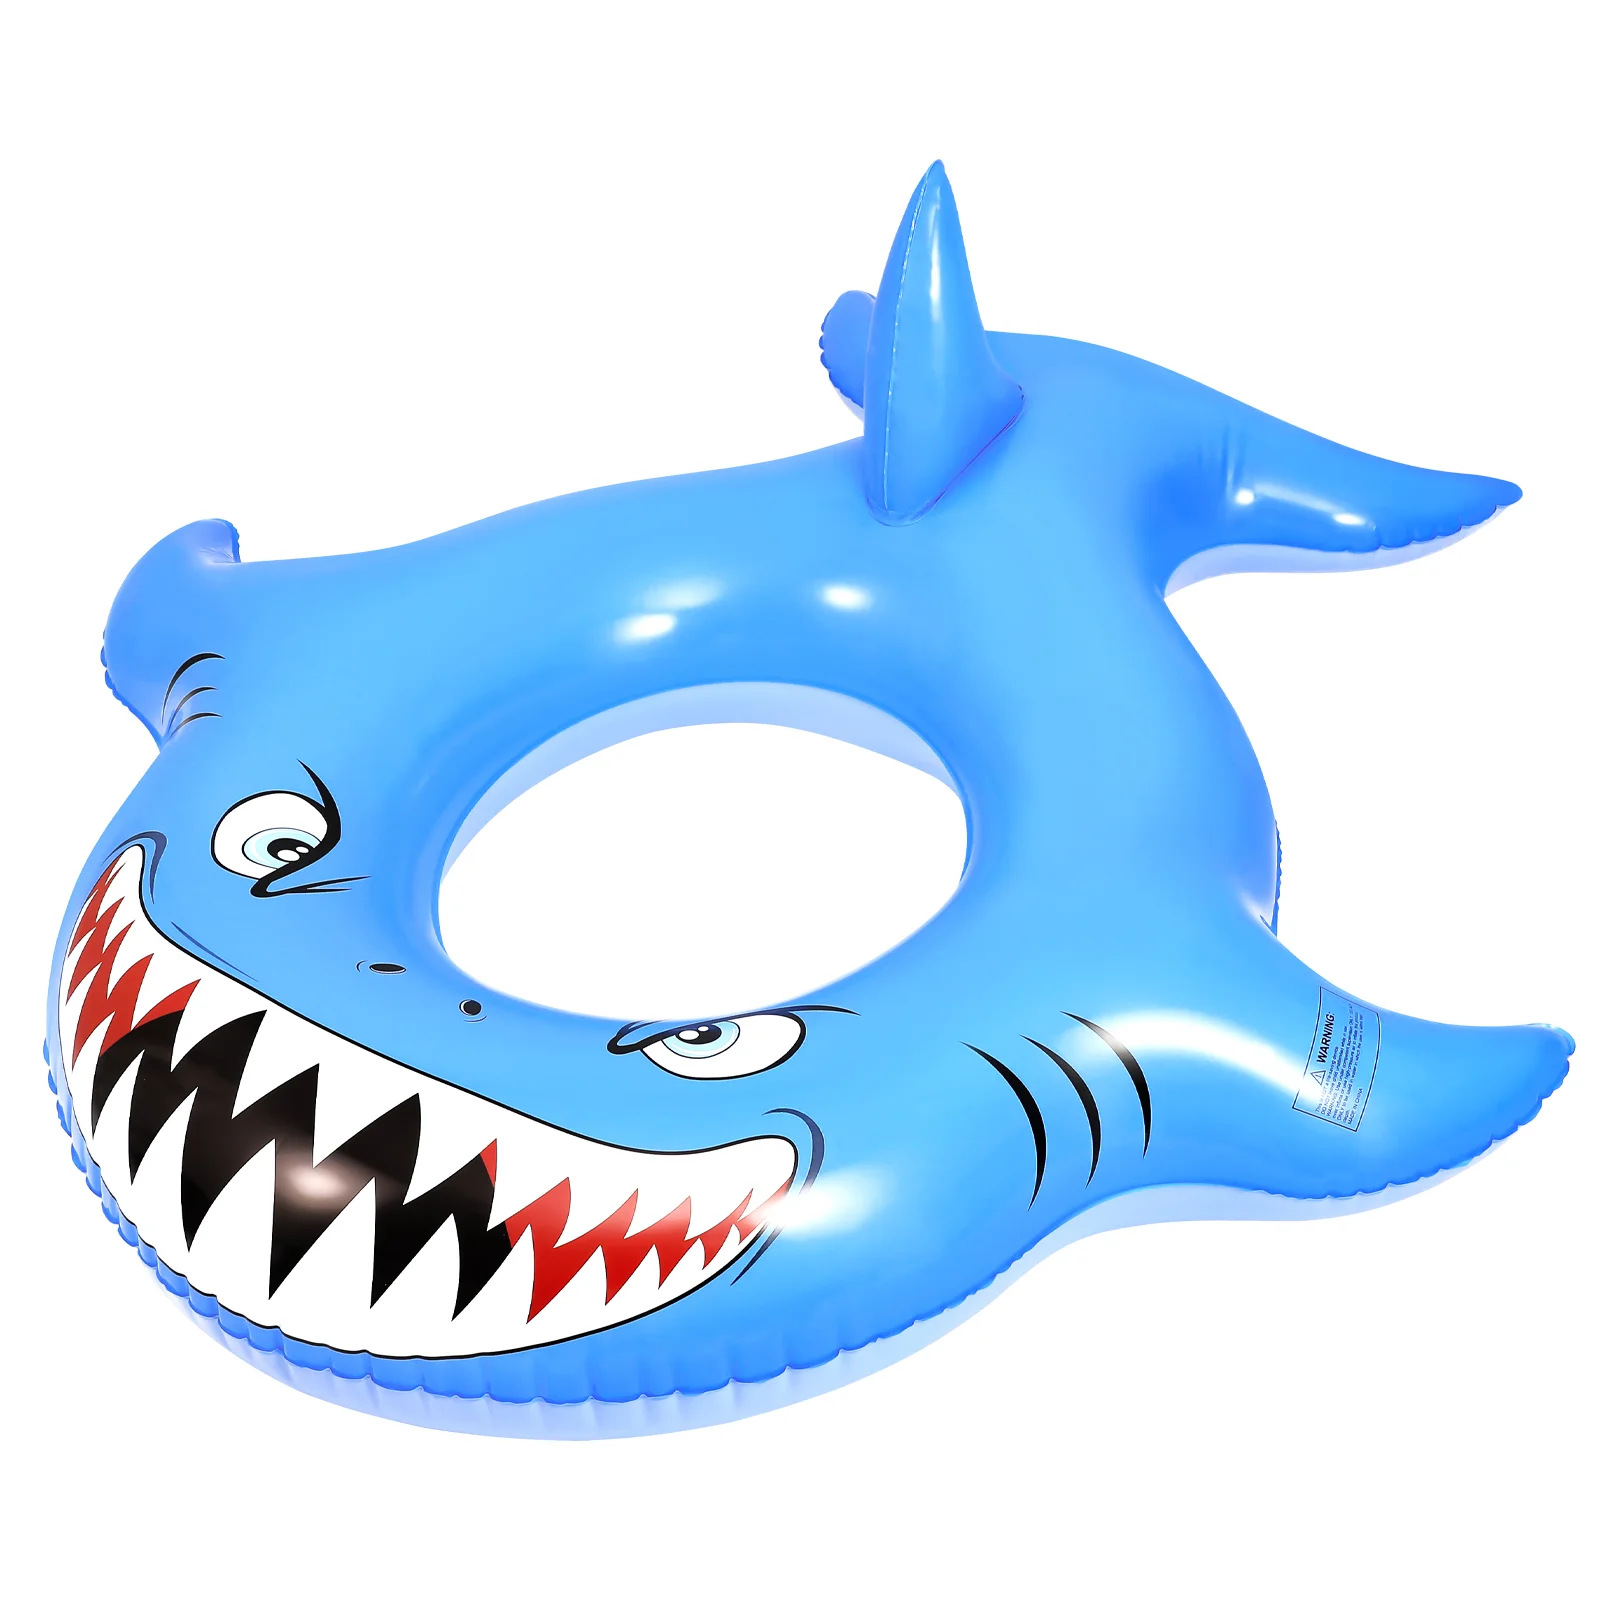 

Clispeed Inflatable Swimming Ring Shark Shape Design Swim Ring Water Party Float Easy to Inflate/Deflate Swimming Tube